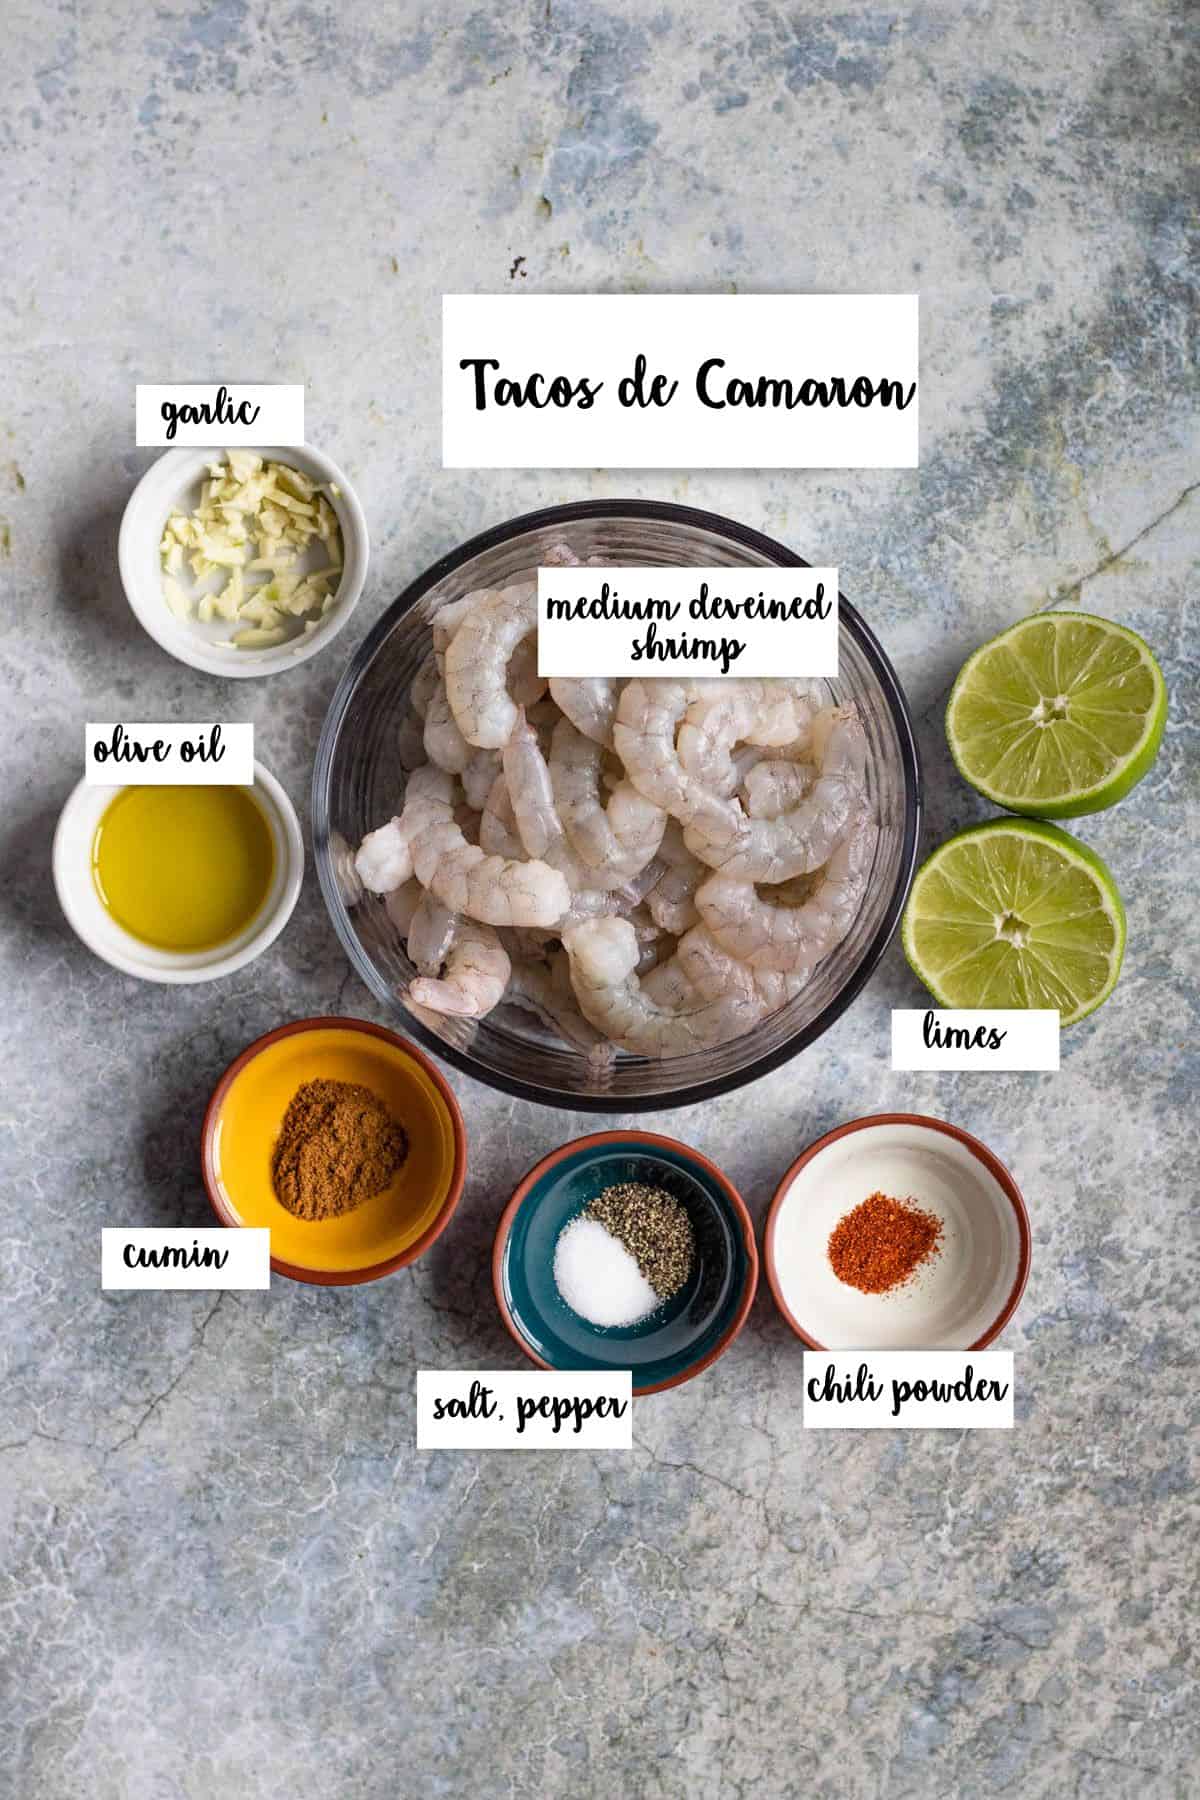 Ingredients shown are used to prepare shrimp tacos. 